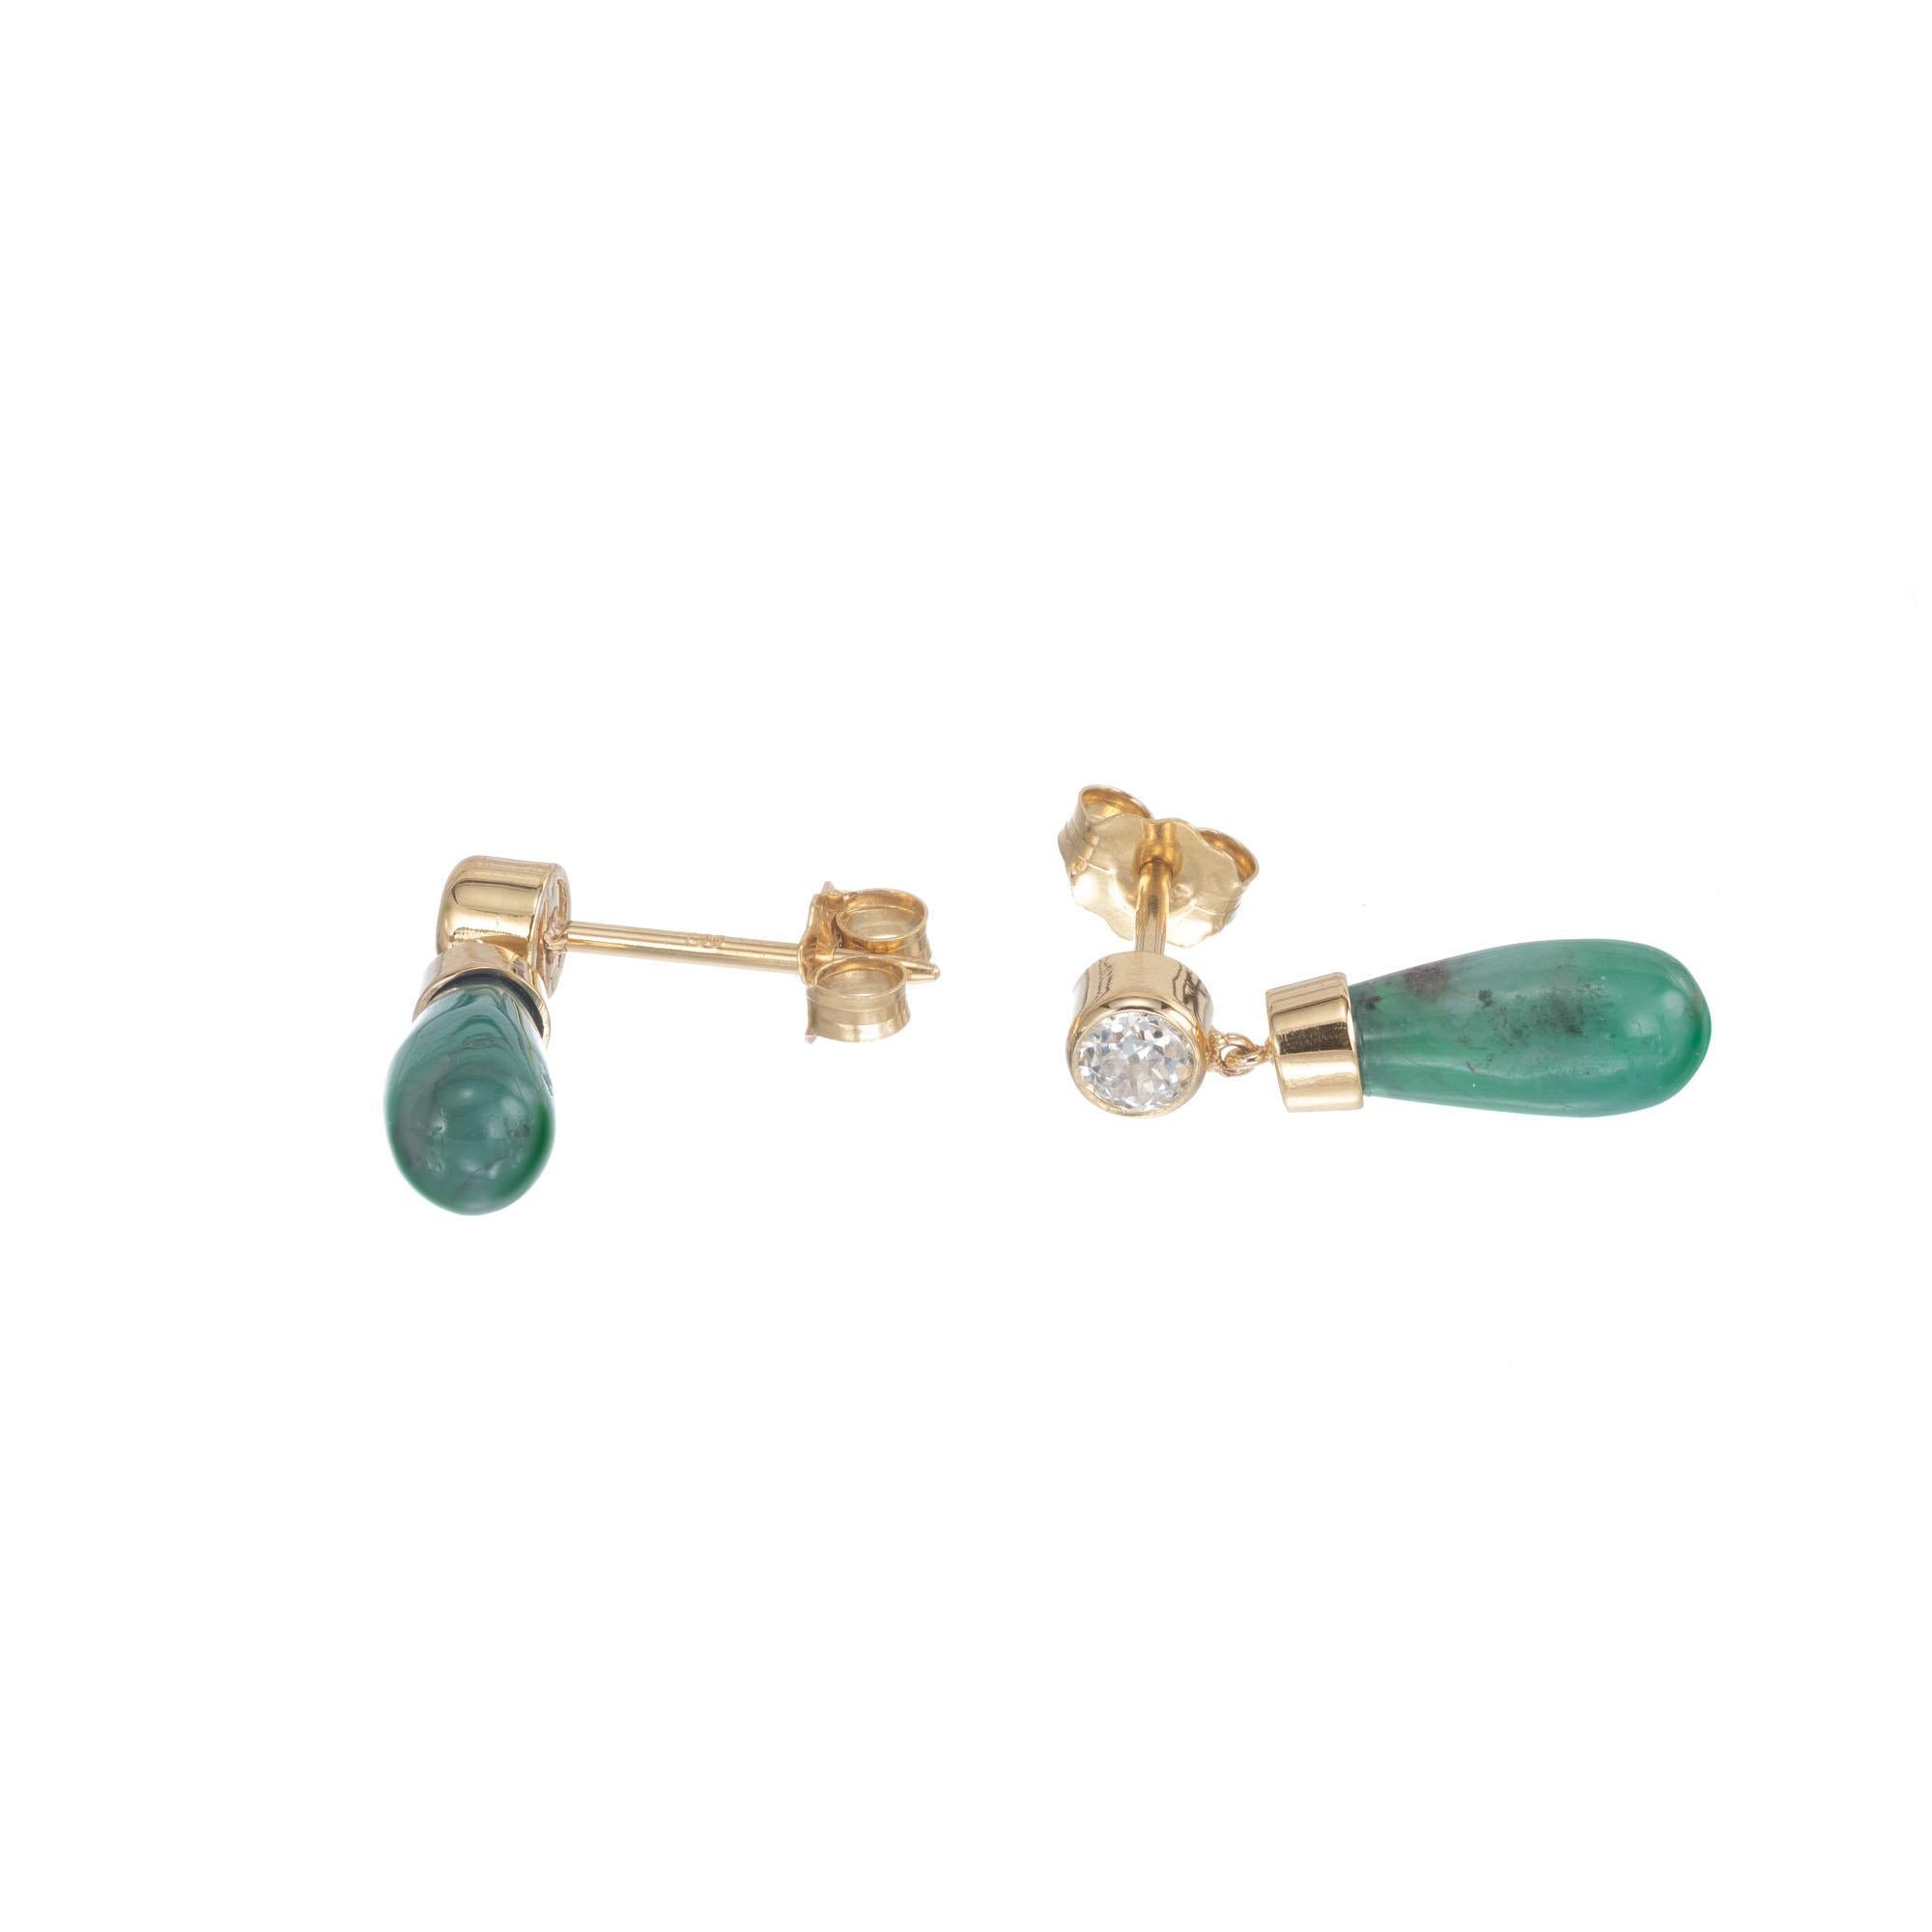 Peter Suchy GIA certified natural emerald and diamond dangle earrings in 18k yellow gold with round accent diamonds. 

2 pierced drop green emeralds MI, approx. 3.79cts GIA Certificate # 5191654872
2 round brilliant cut diamonds H-I SI, approx.